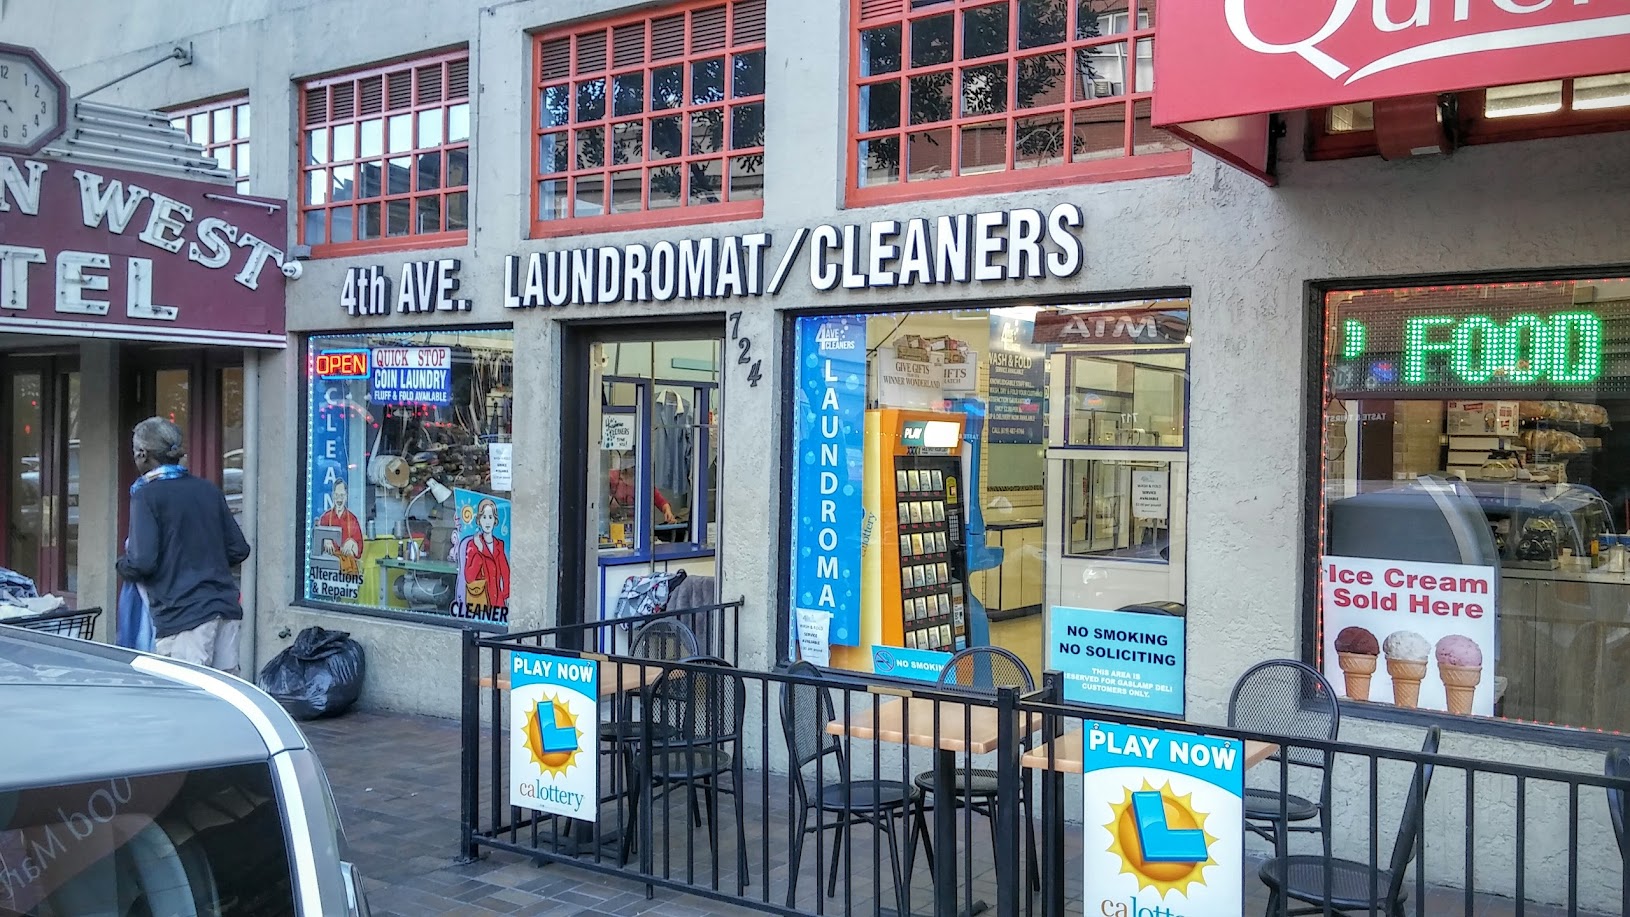 4th Ave Cleaners